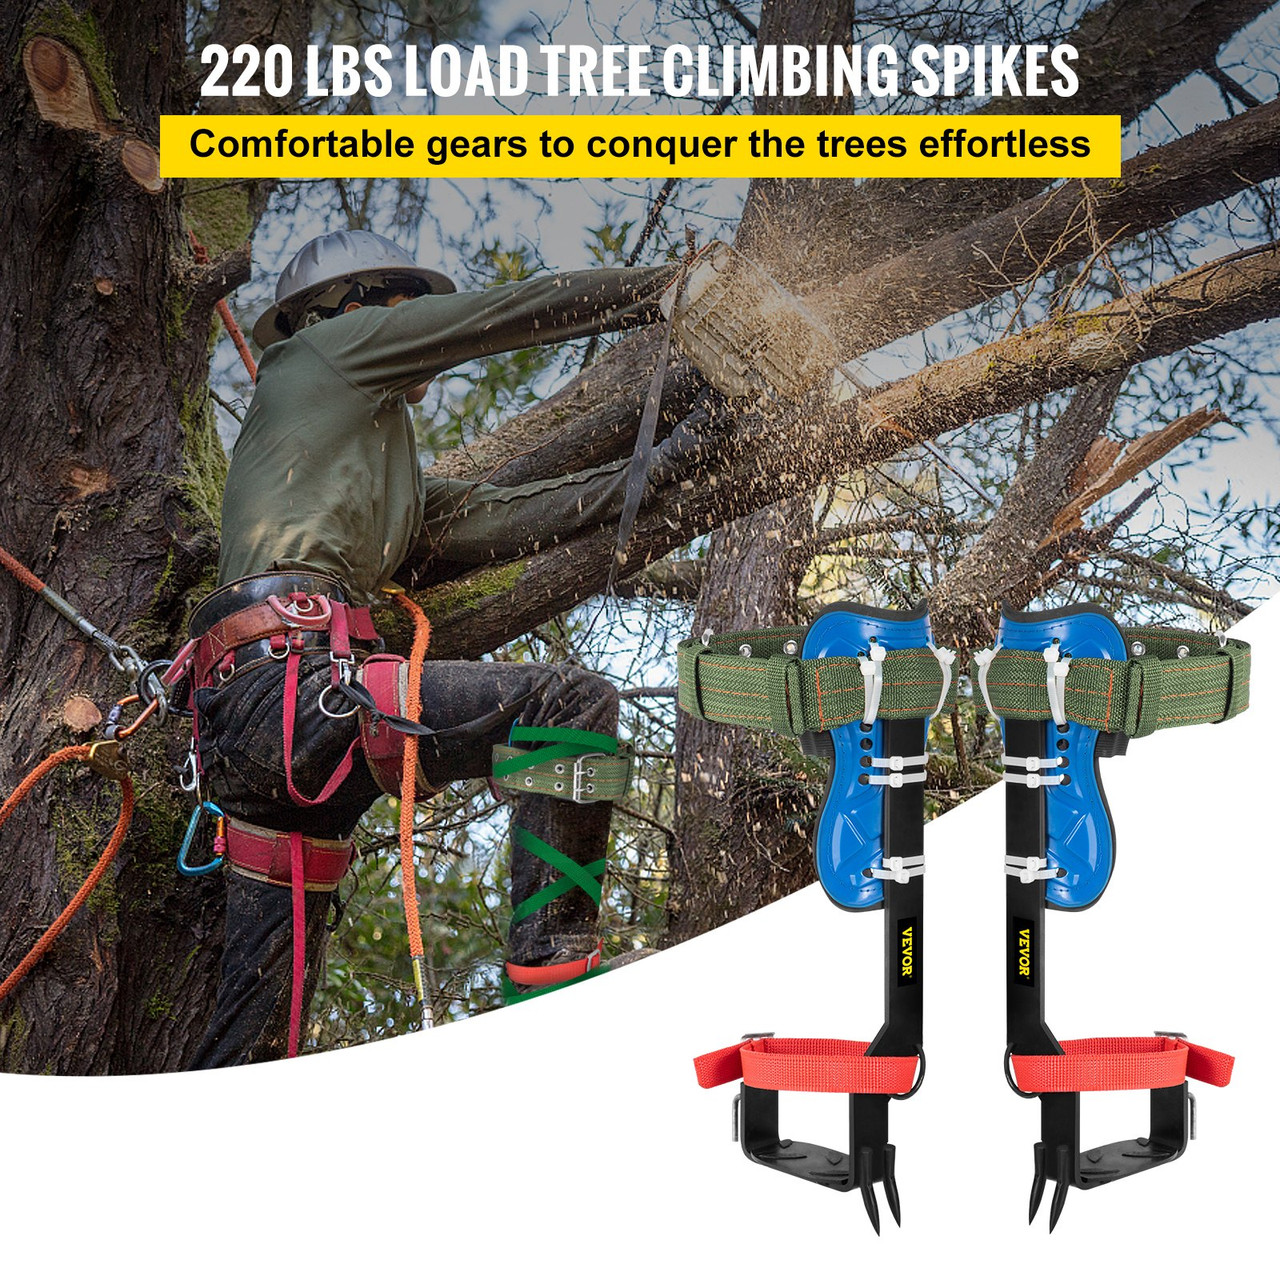 A. Climbers with collecting and tree climbing gear. Note hard hat